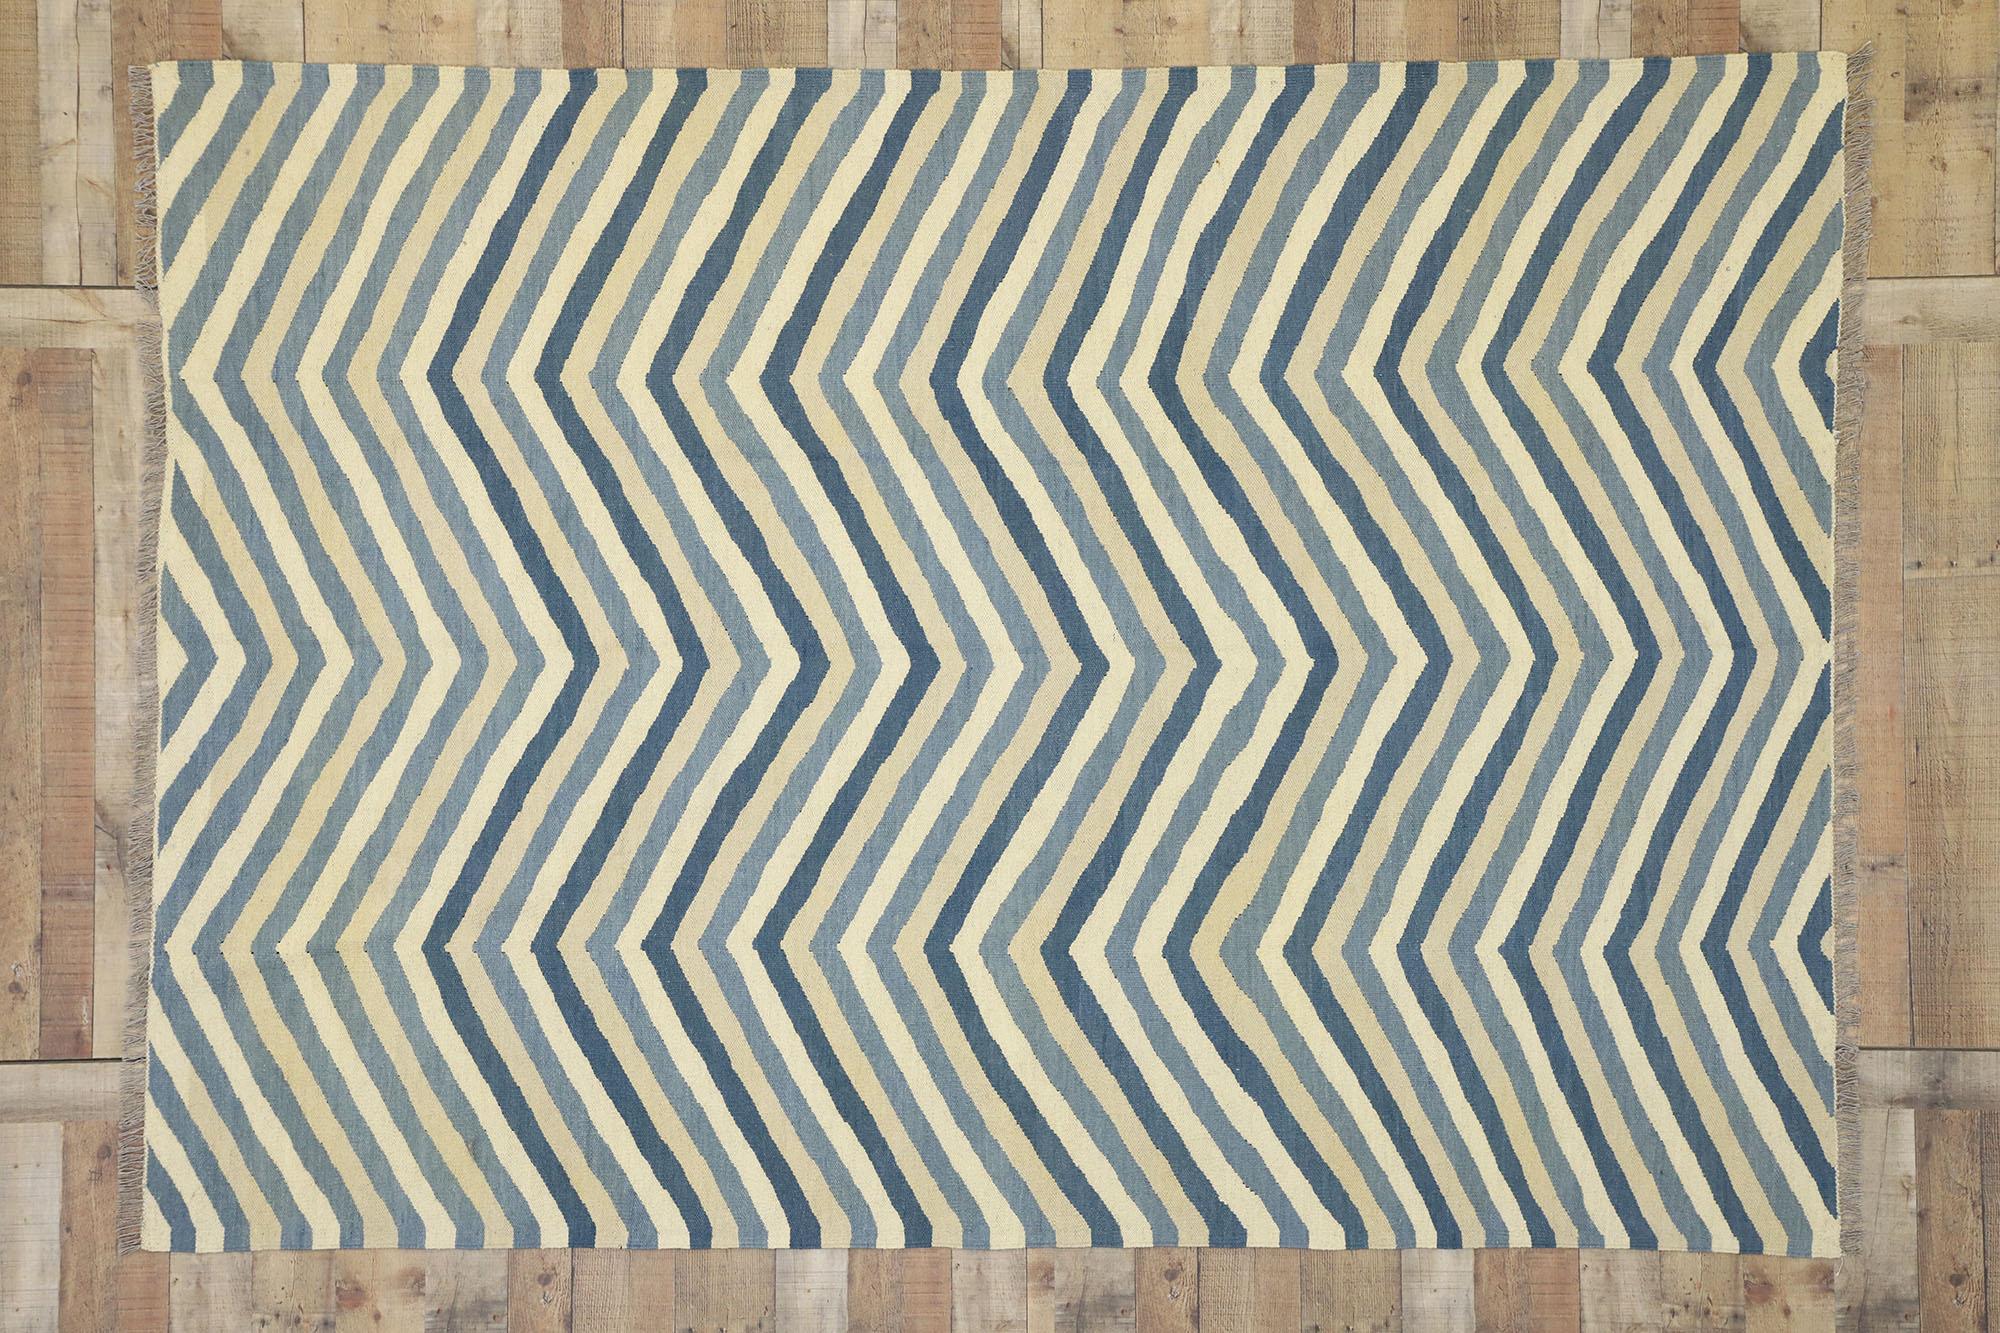 Contemporary New Kilim Area Rug with Herringbone Chevron Design and Coastal Living Style For Sale